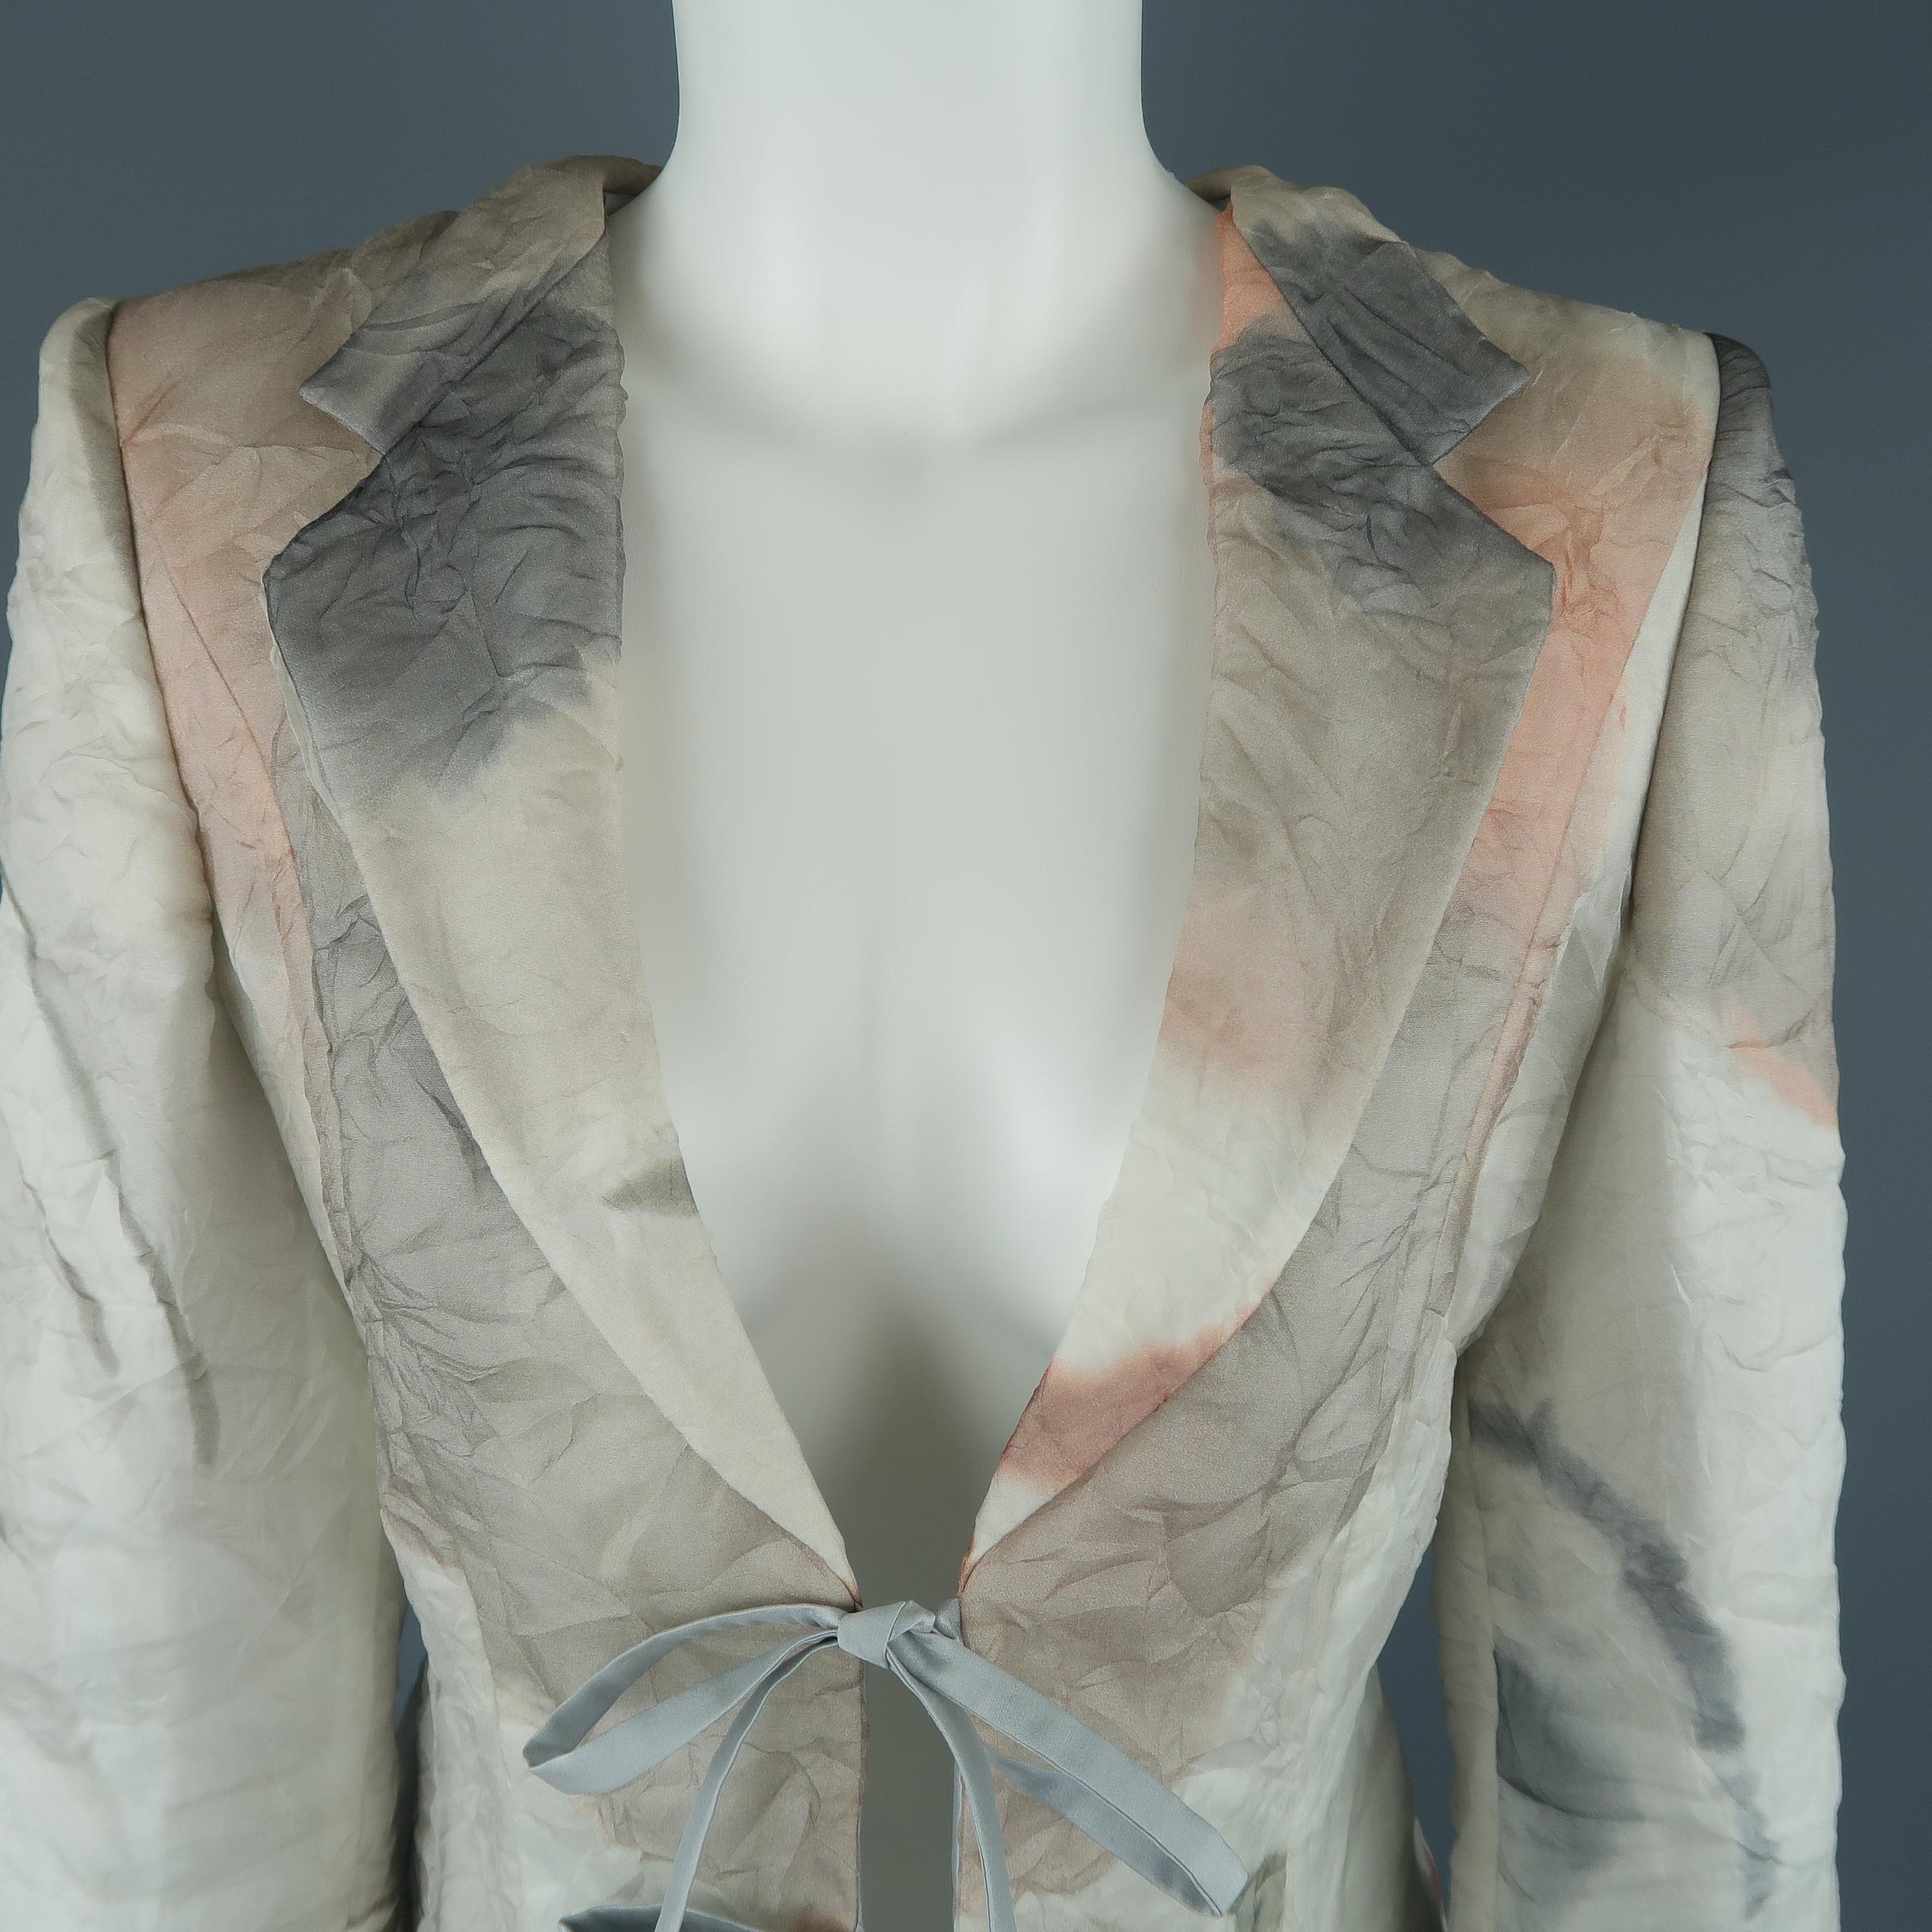 Giorgio Armani evening jacket comes in a gorgeous abstract marble print wrinkled textured silk organza overlay fabric with a strong shoulder, wide neckline with notch lapel, slit cuffs, and double tied closure. Made in Italy.
 
Excellent Pre-Owned